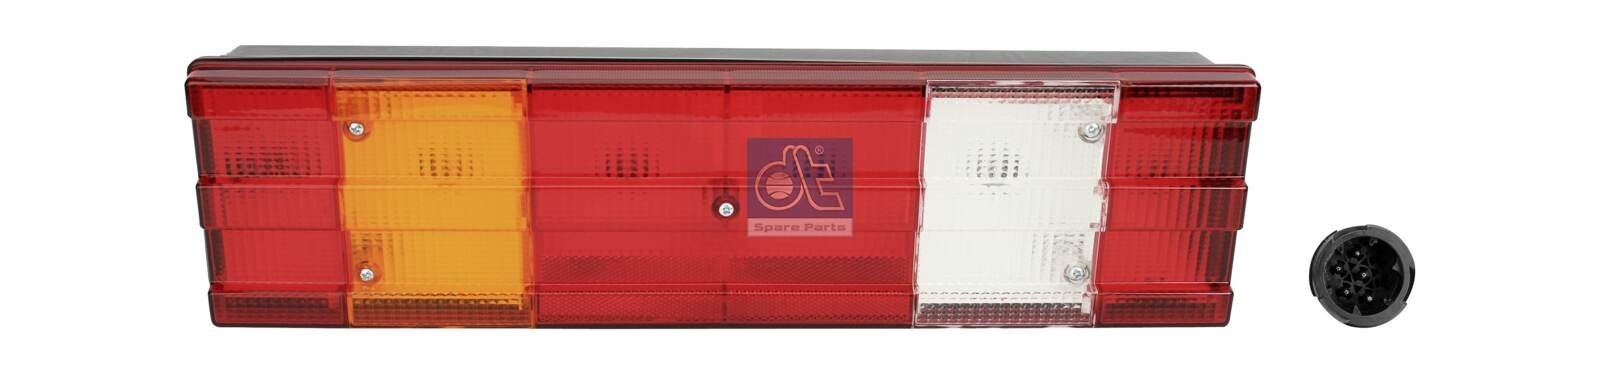 2VP 007 500-471 DT Spare Parts Left, P21W, 24V Left-/right-hand drive vehicles: for right-hand drive vehicles Tail light 4.62383 buy